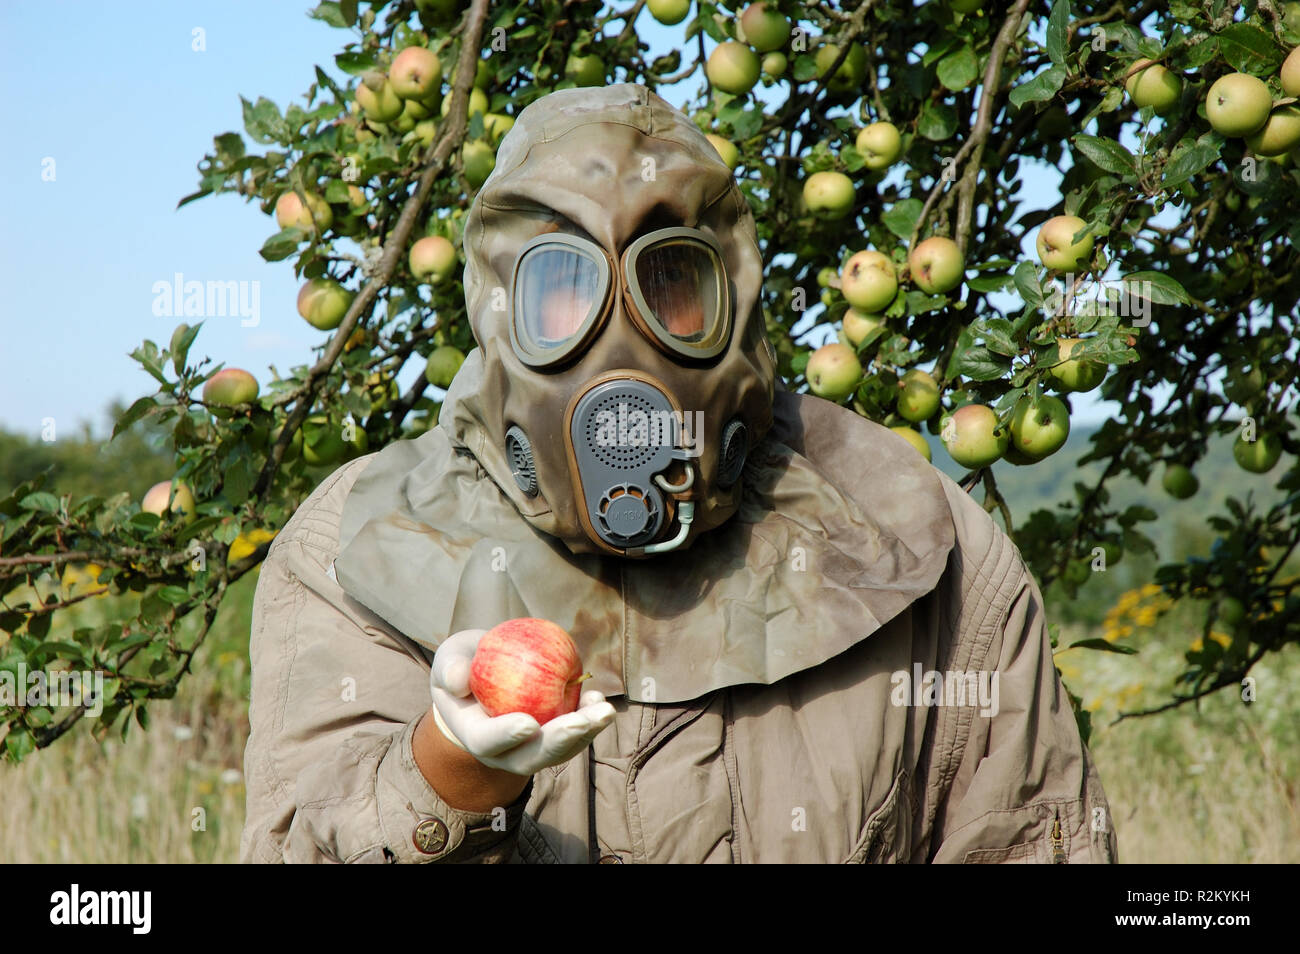 man with gas mask holding an apple Stock Photo